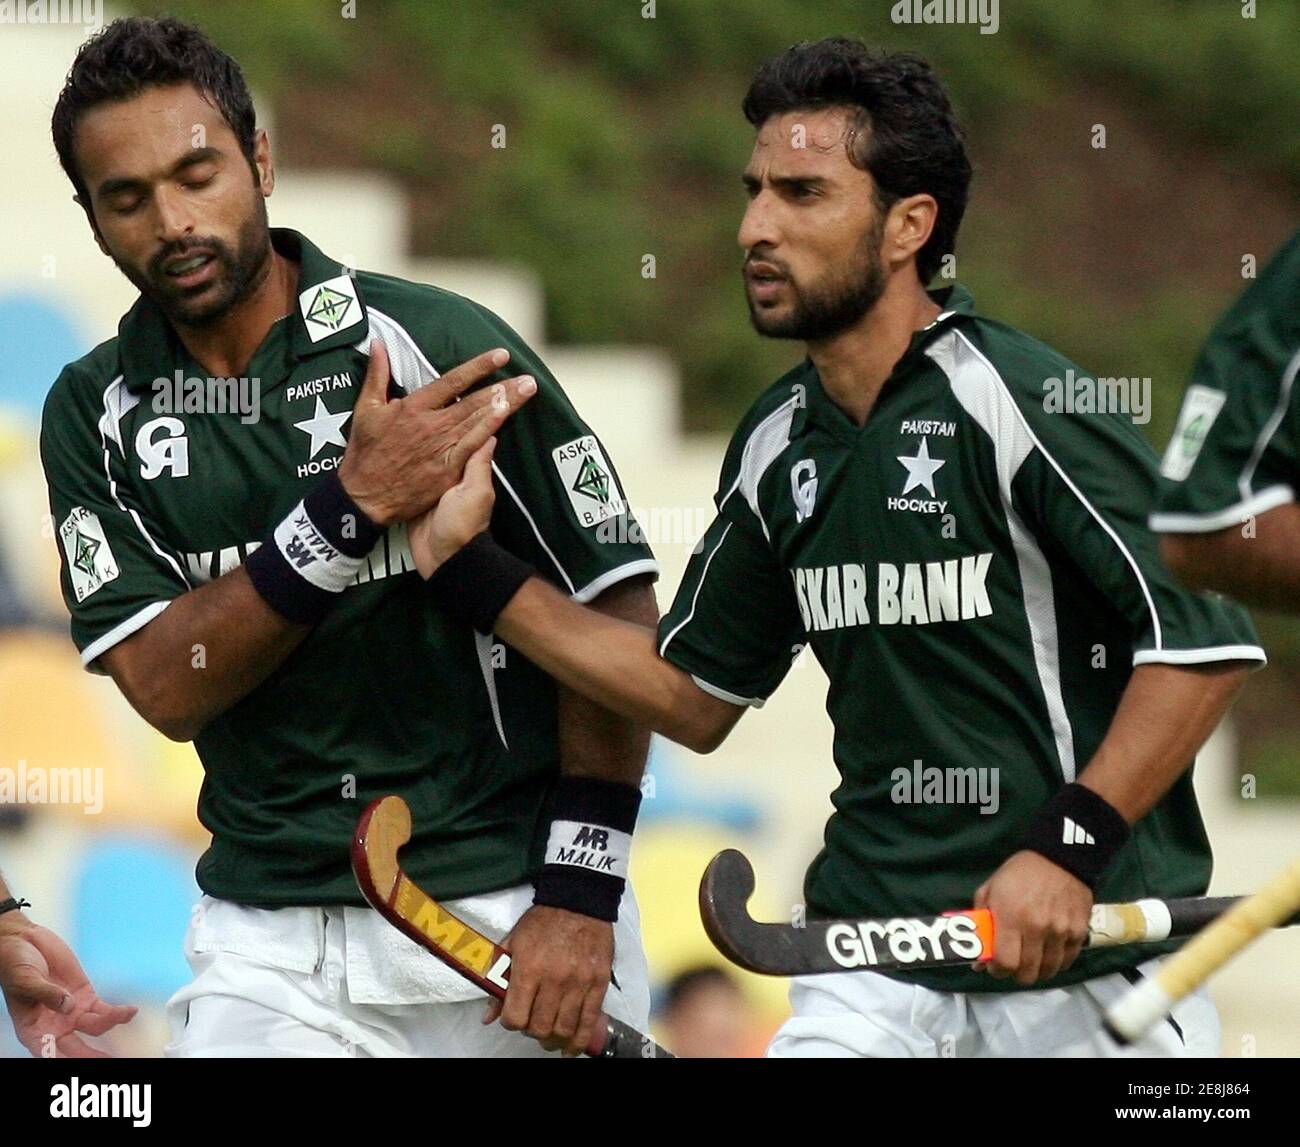 Pakistan's Sohail Abbas (L) and Shakeel Abbasi (R) celebrate after scoring against Japan during their Men's Field Hockey World Cup match at the Warsteiner Hockey Park stadium in Moenchengladbach September 7, 2006. REUTERS/Pascal Lauener  (GERMANY) Stock Photo